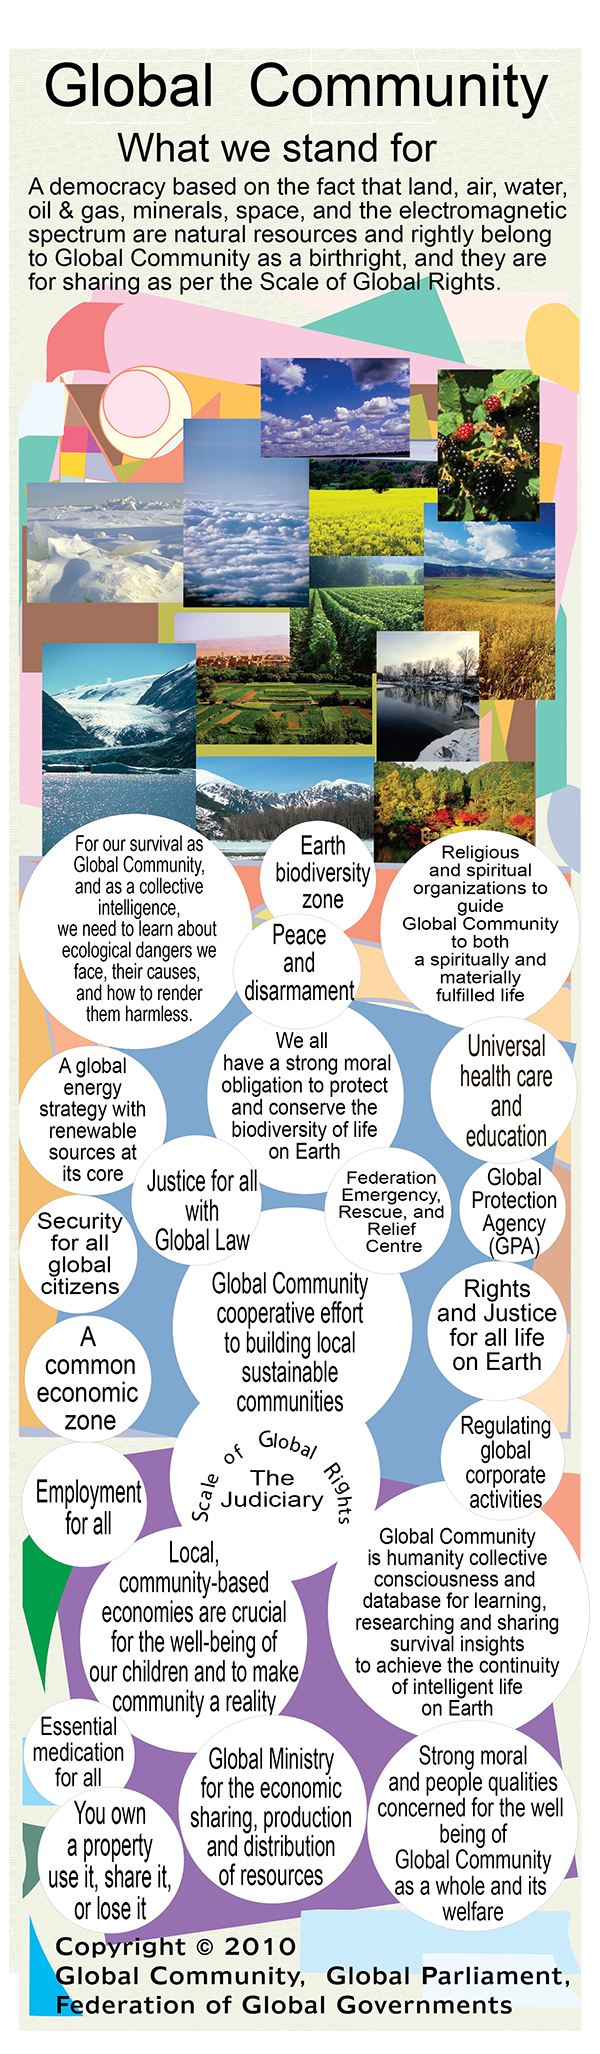 What Global Community stands for